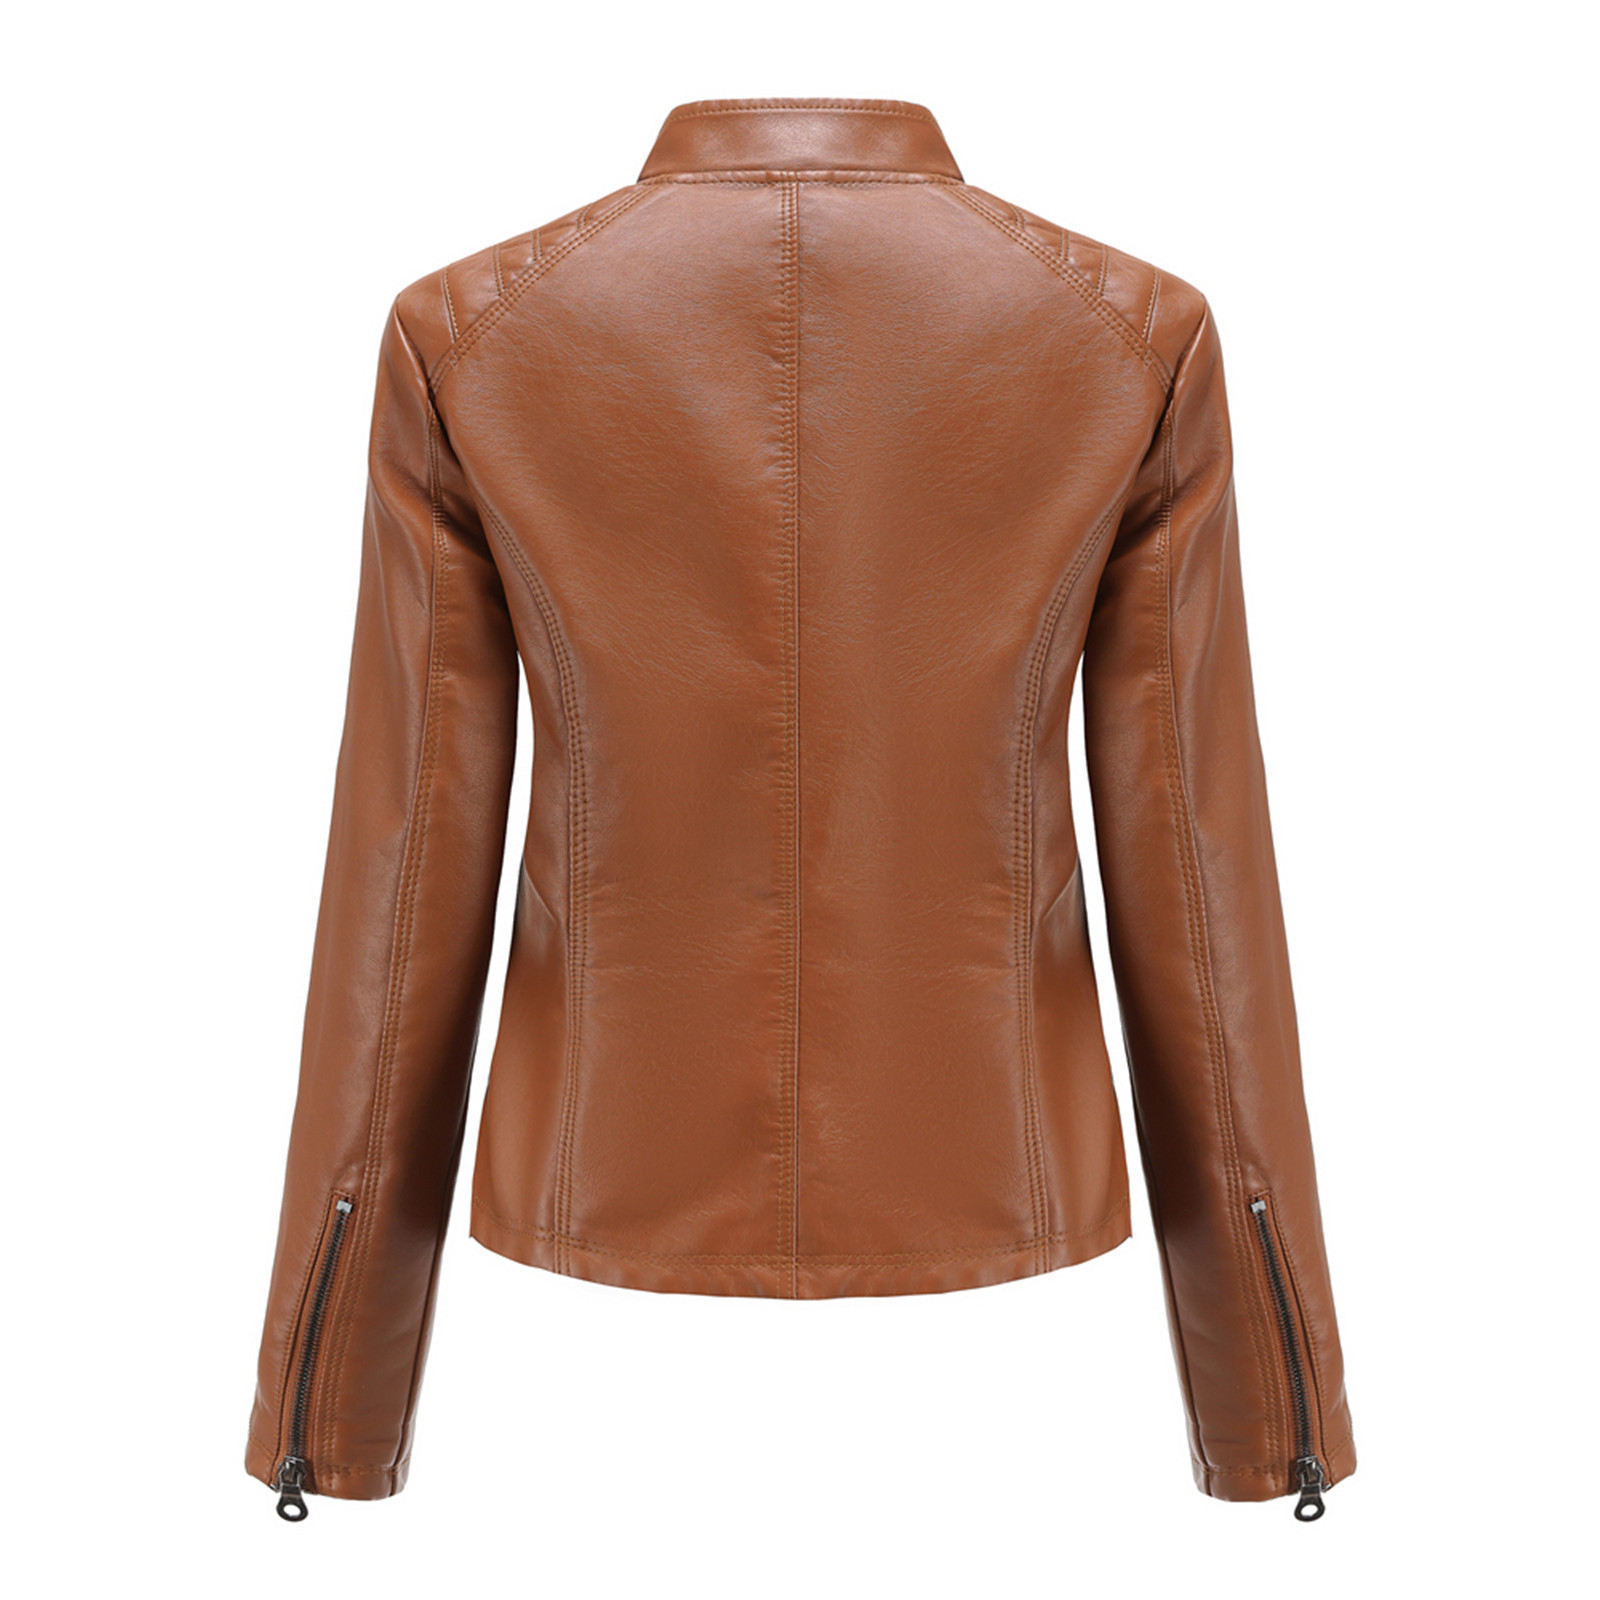 Women Bomber Motorcycle Jacket Long Sleeve Stand Collar Slim Fit Outerwear Coat Note Please Buy One Or Two Sizes Larger - image 3 of 6